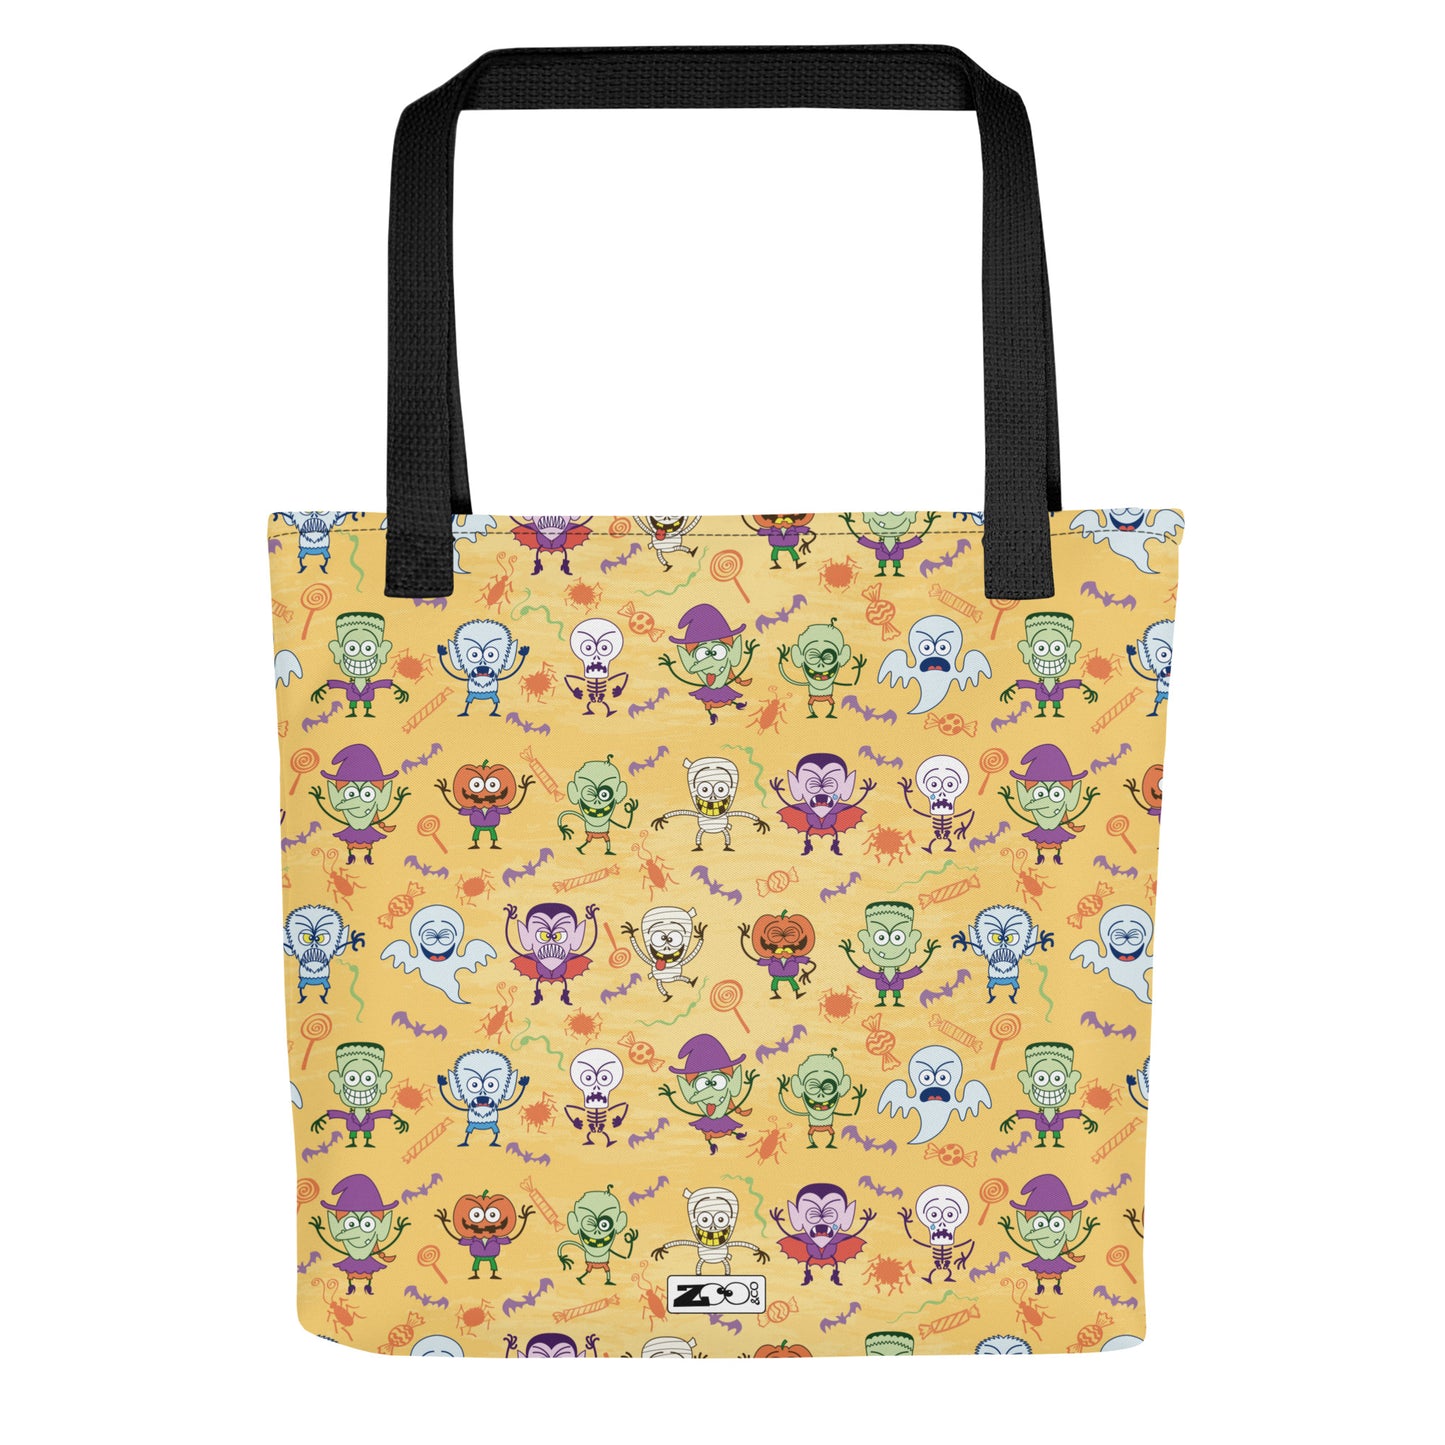 Halloween characters making funny faces Tote bag. Front view